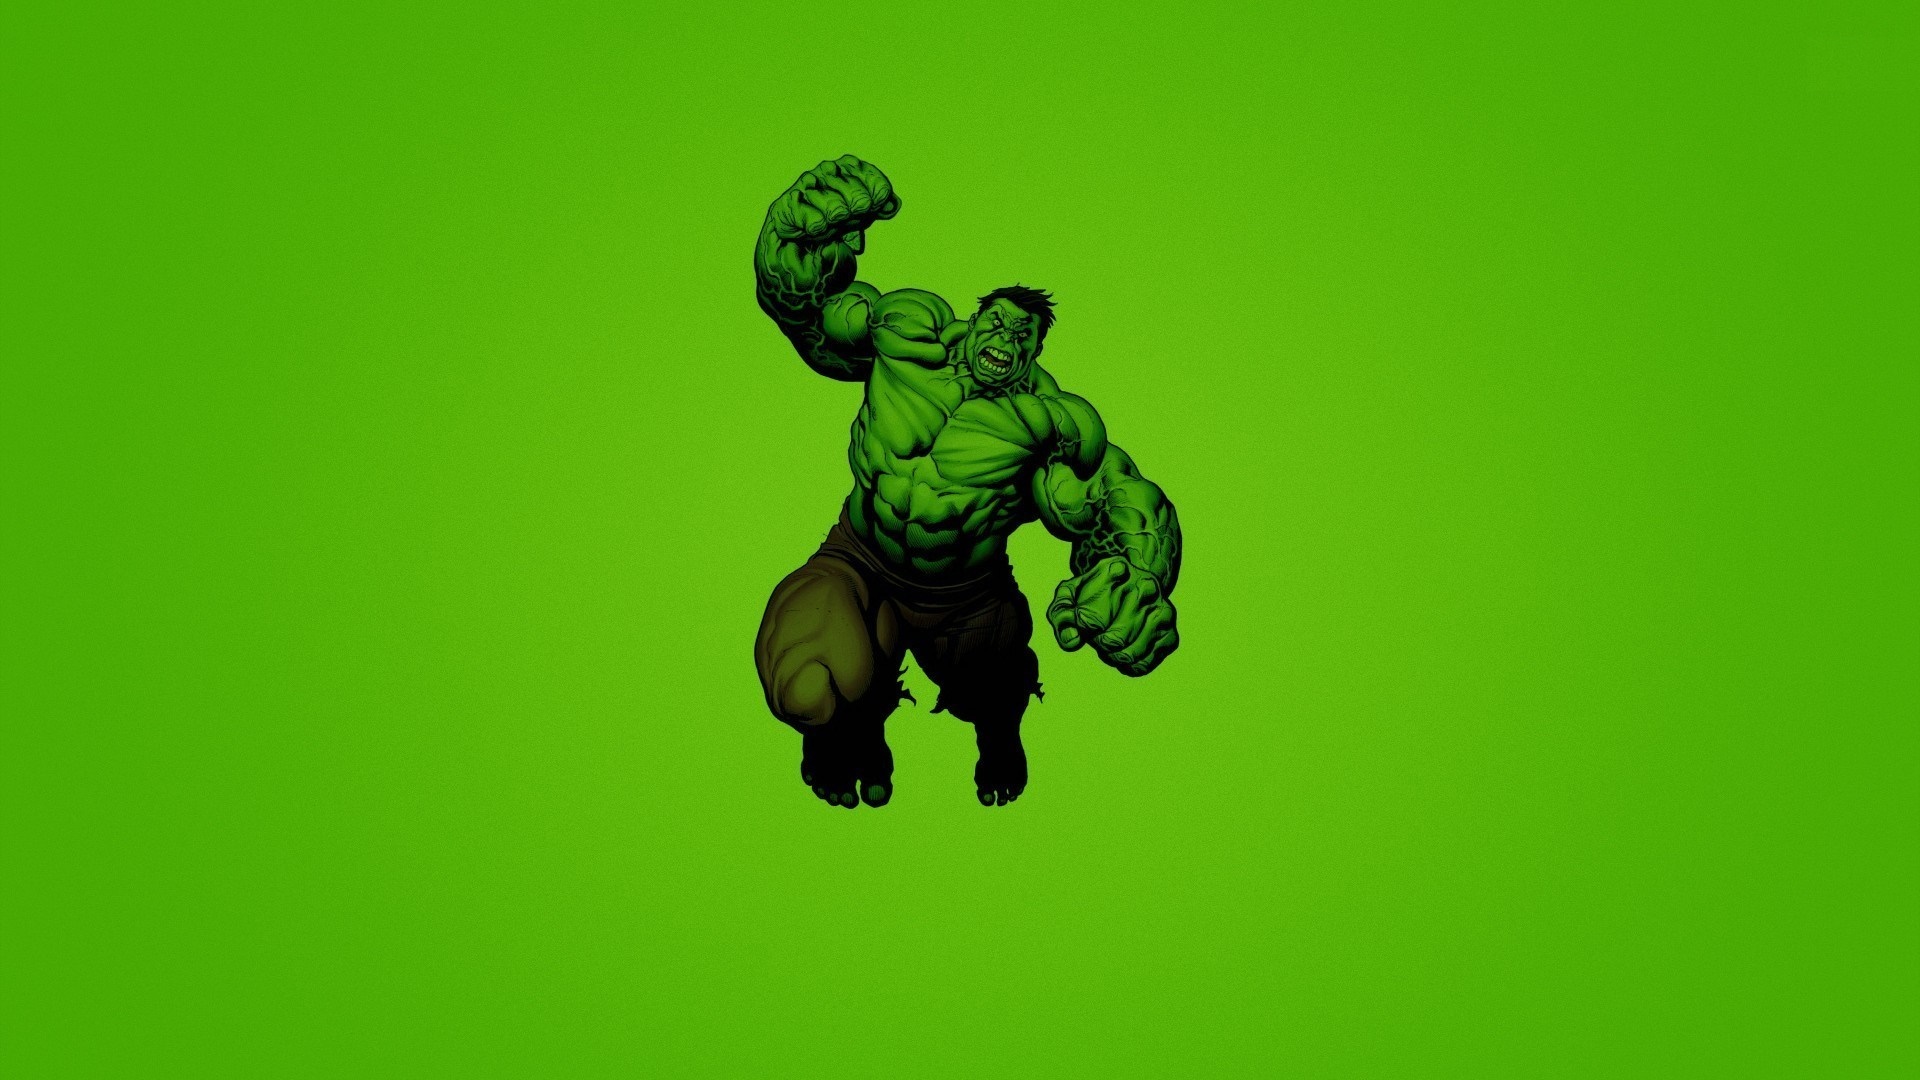 Incredible Hulk Wallpapers HD Backgrounds download.